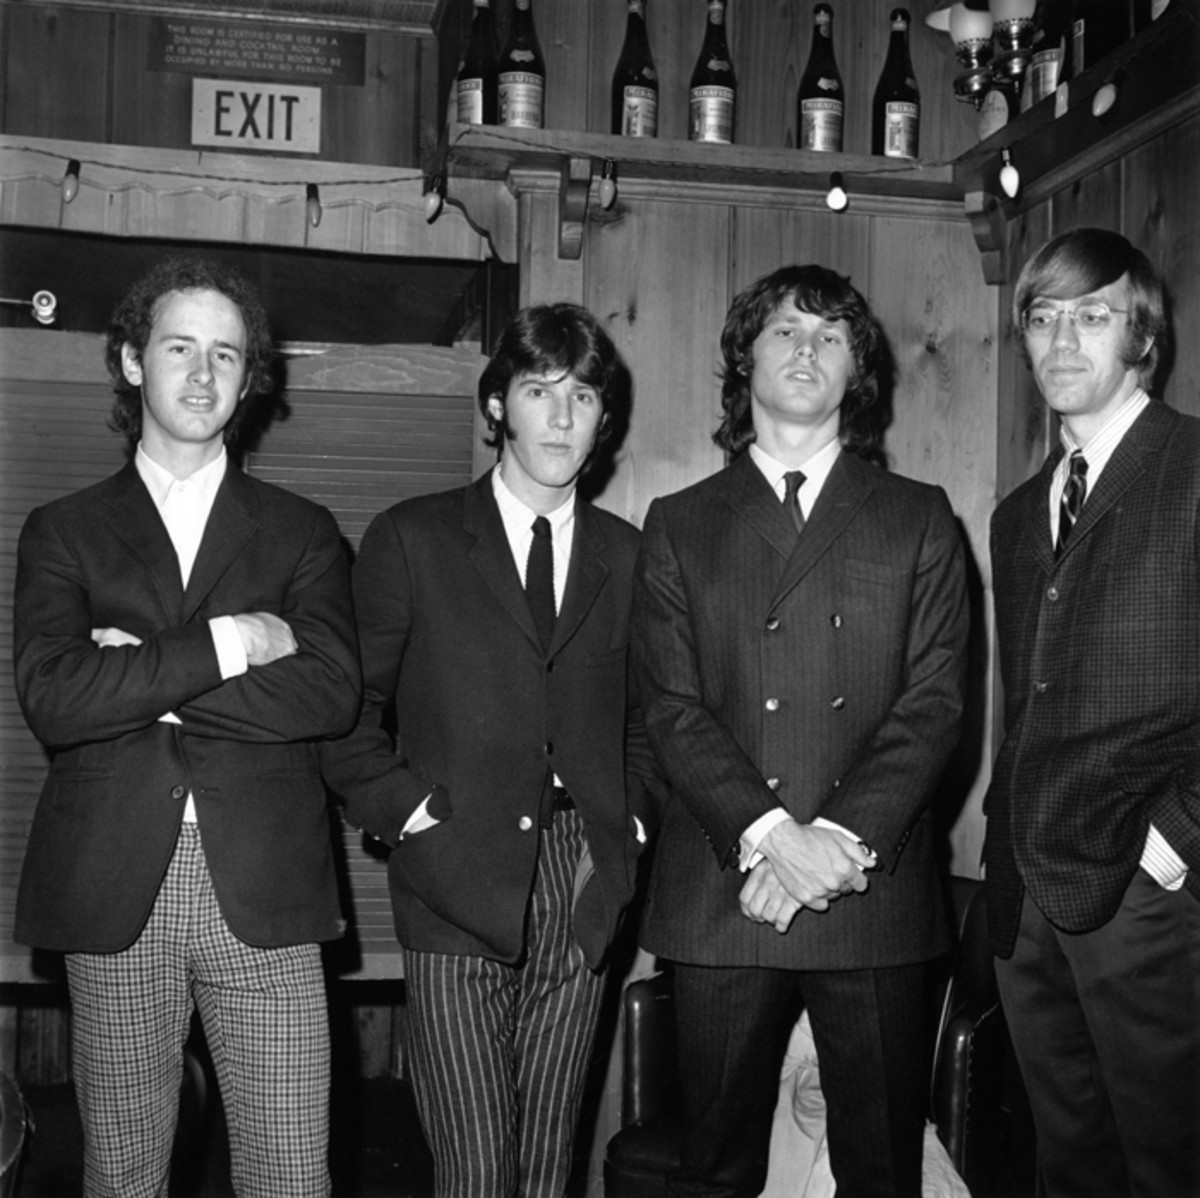  Early Doors (L-R): Robby Krieger, John Densmore, Jim Morrison and Ray Manzarek. Michael Ochs Archives/Getty Images